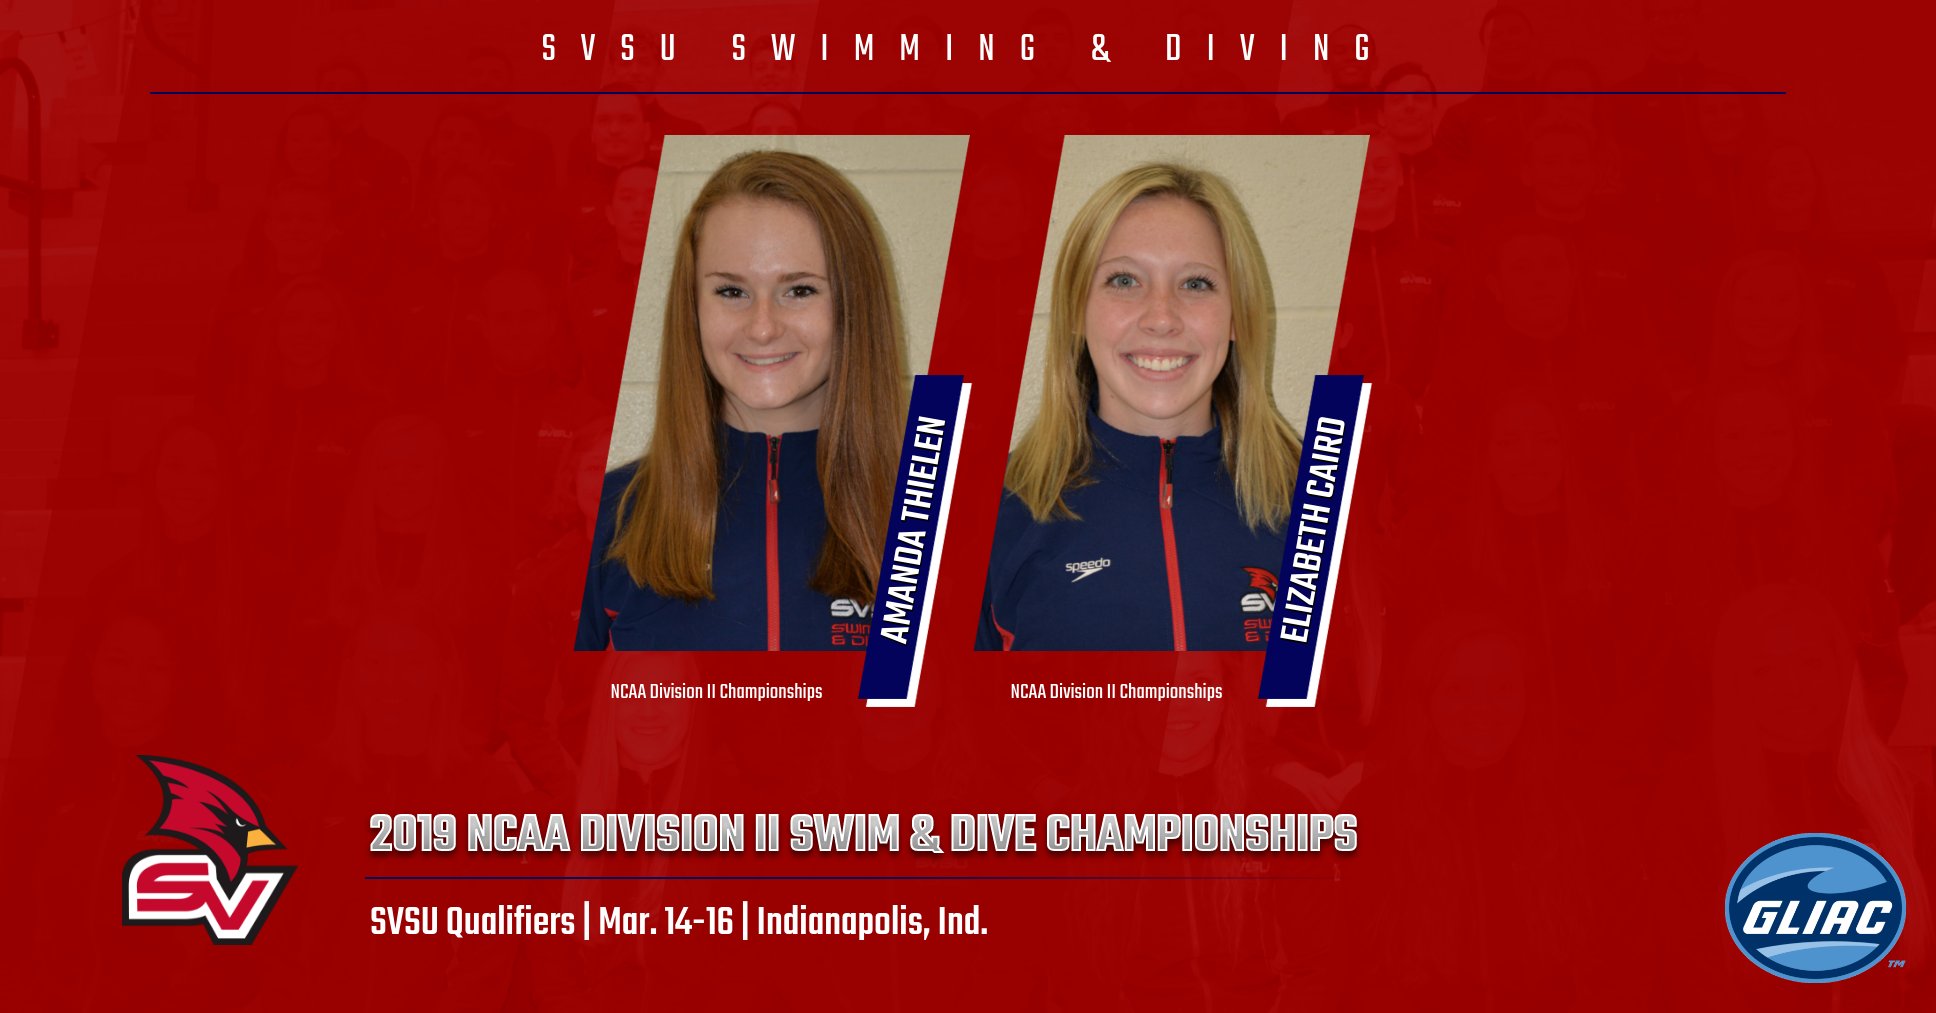 Caird, Thielen set for competition at 2019 NCAA Division II Championships